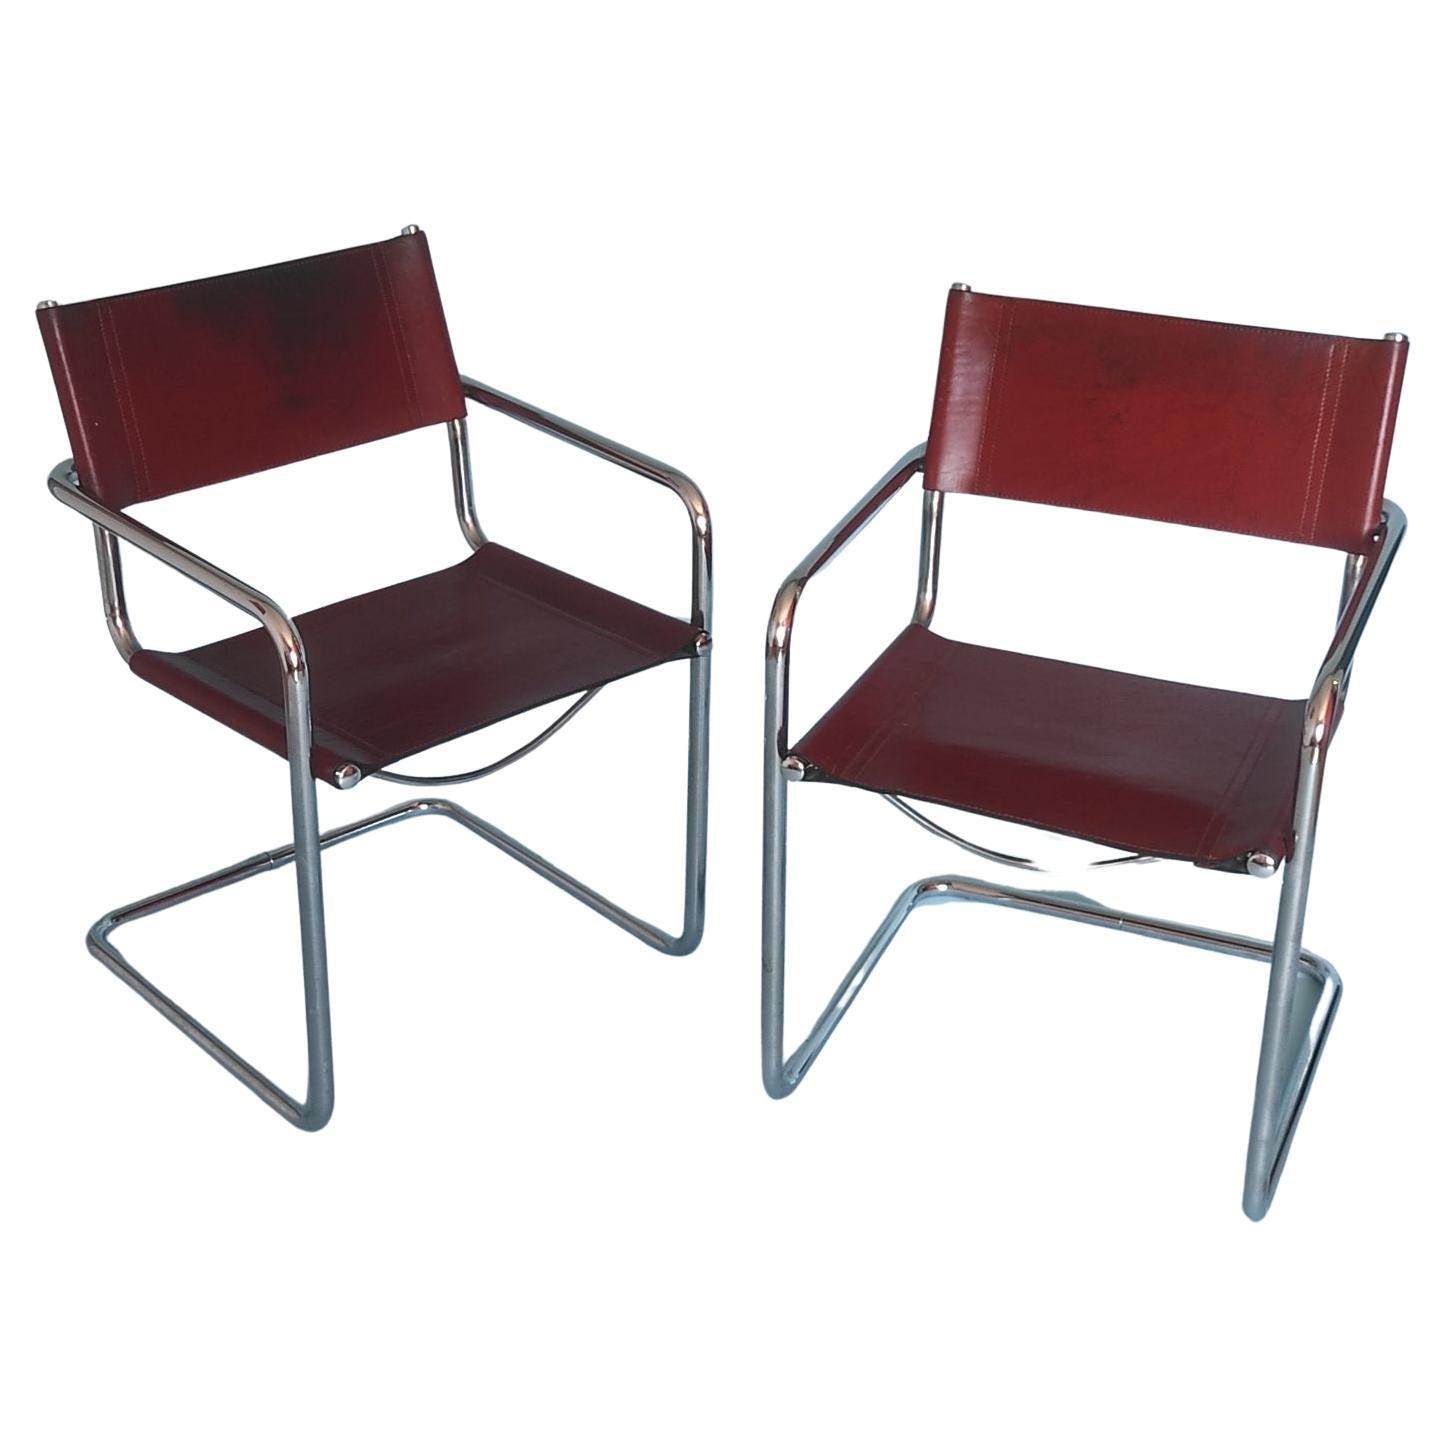  Set of TwoUNIFOR Cantilever Chair By Tito Agnoli 1970s For Sale